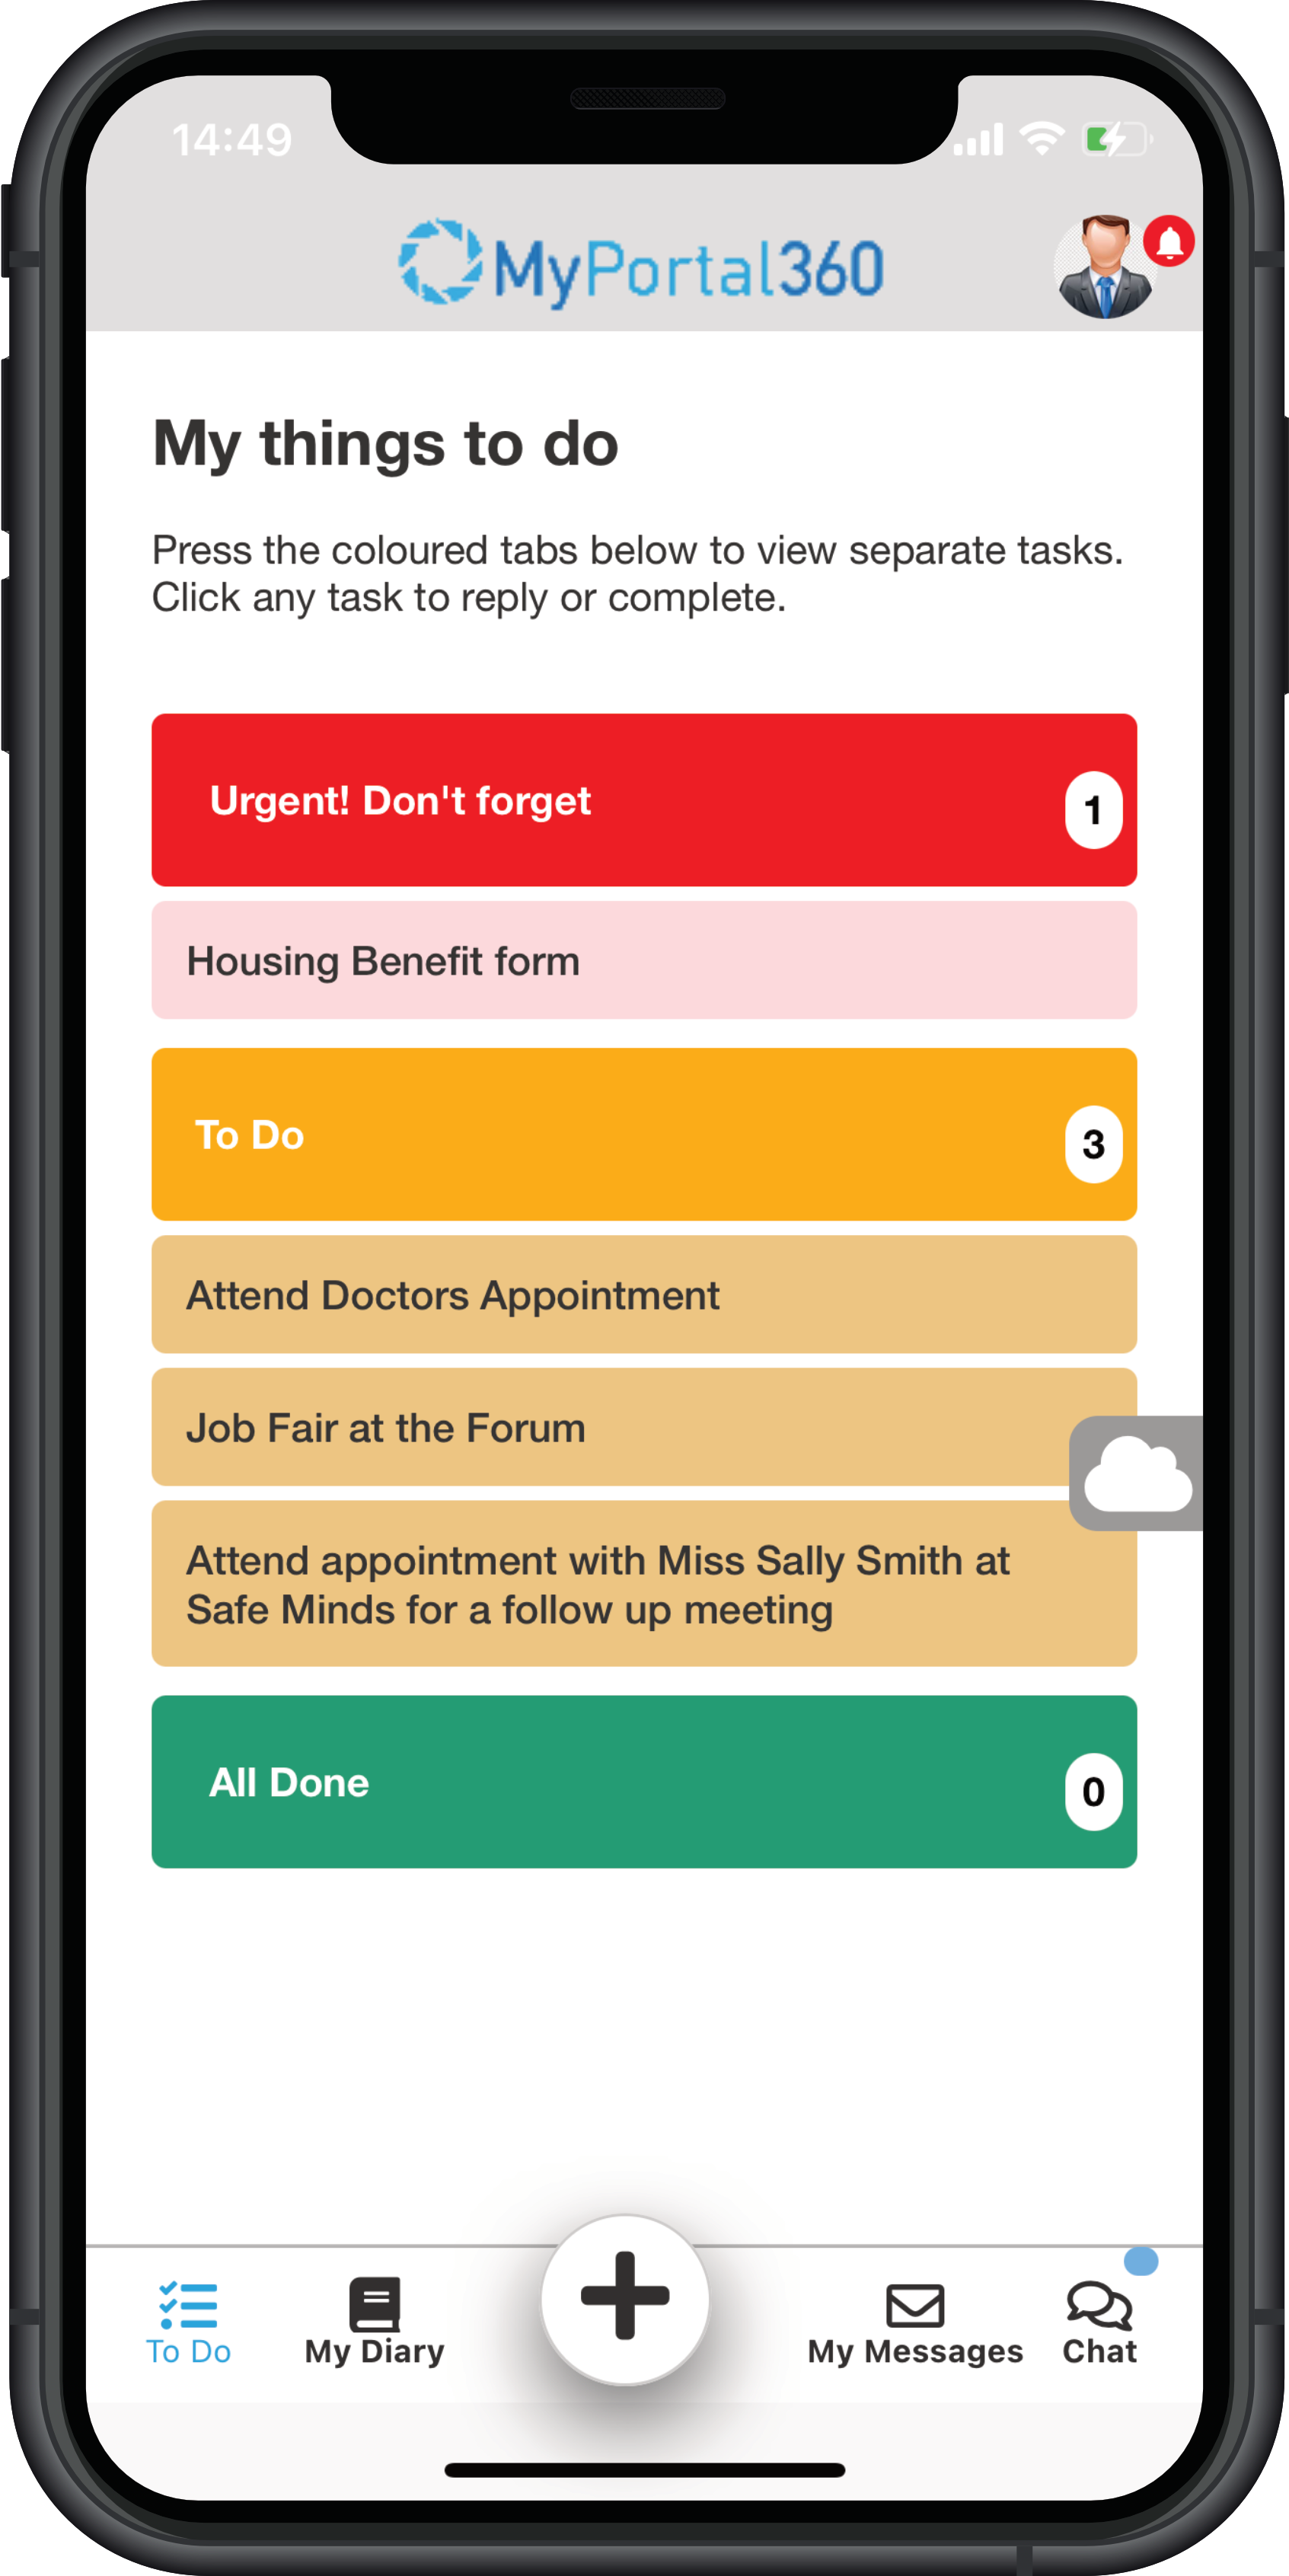 Built to allow clients and support teams to interact conveniently and discretely from a smart phone, the MyPortal360 app features notifications and reminders for messages, appointments and tasks, as well as, secure one and two-way communications.